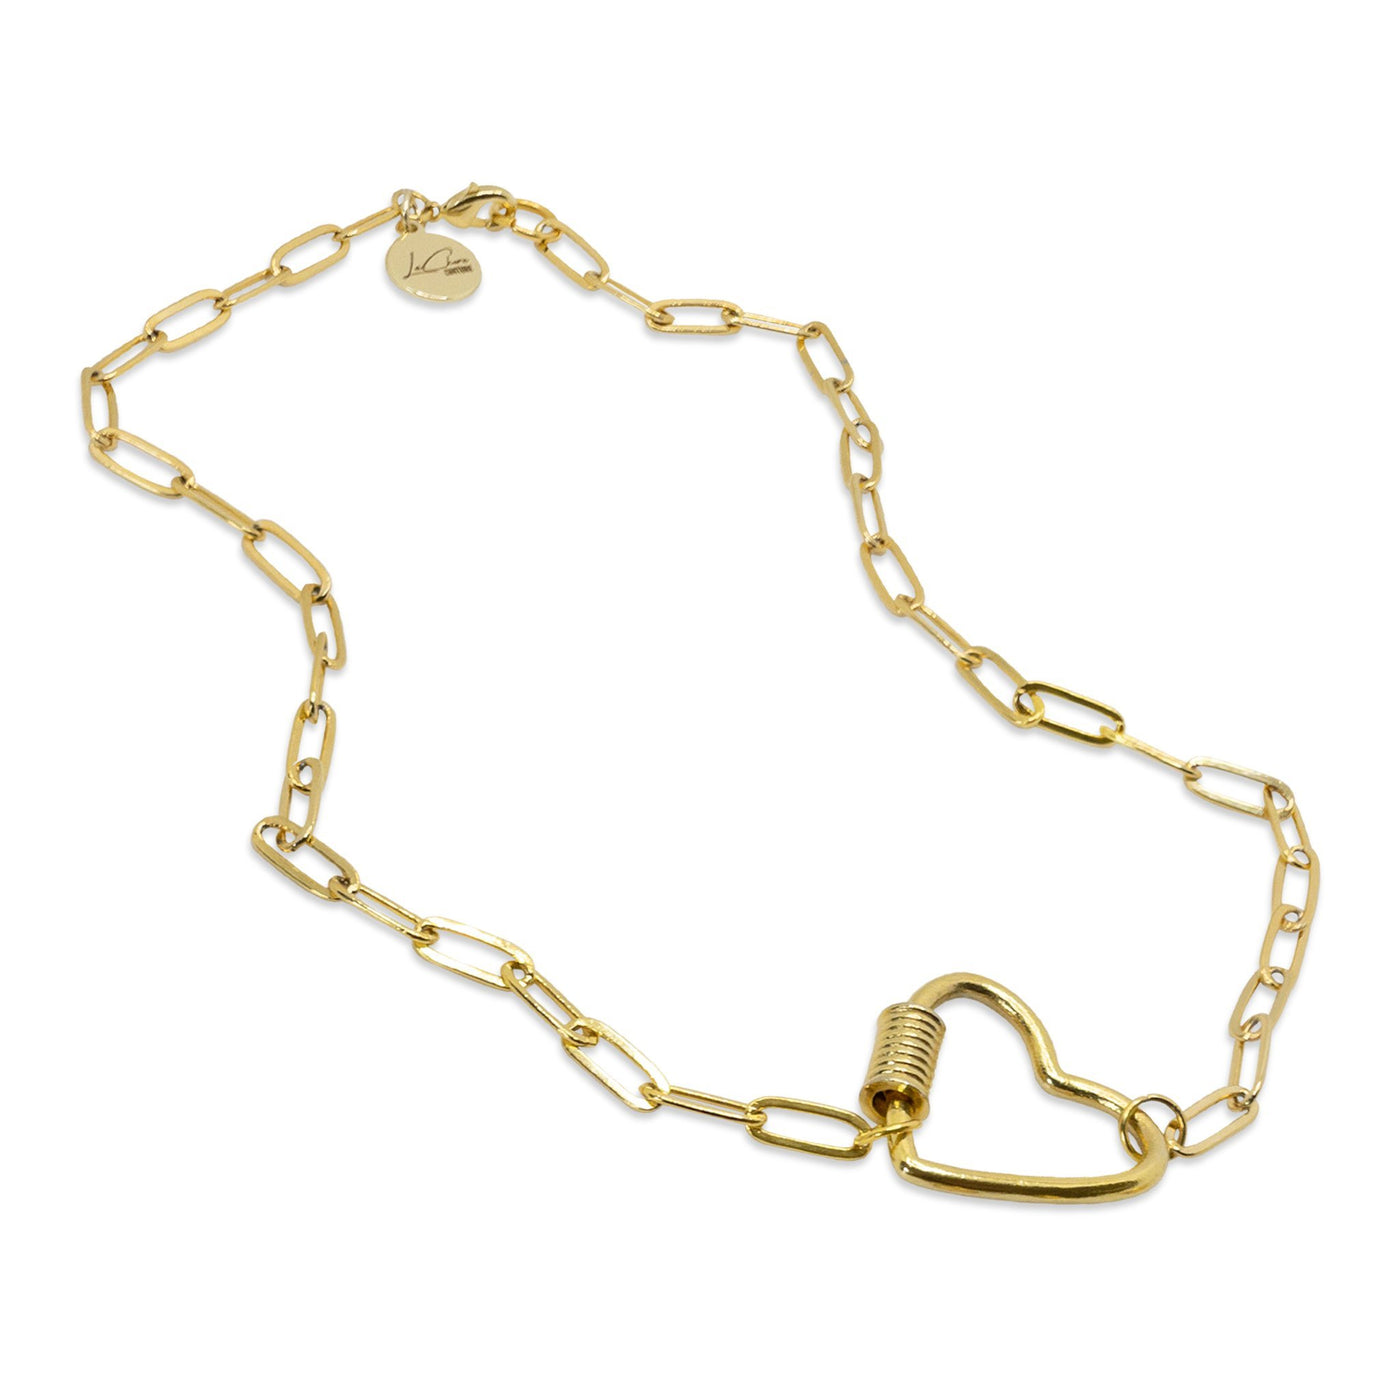 Love Lock Charm Necklace LaCkore Couture